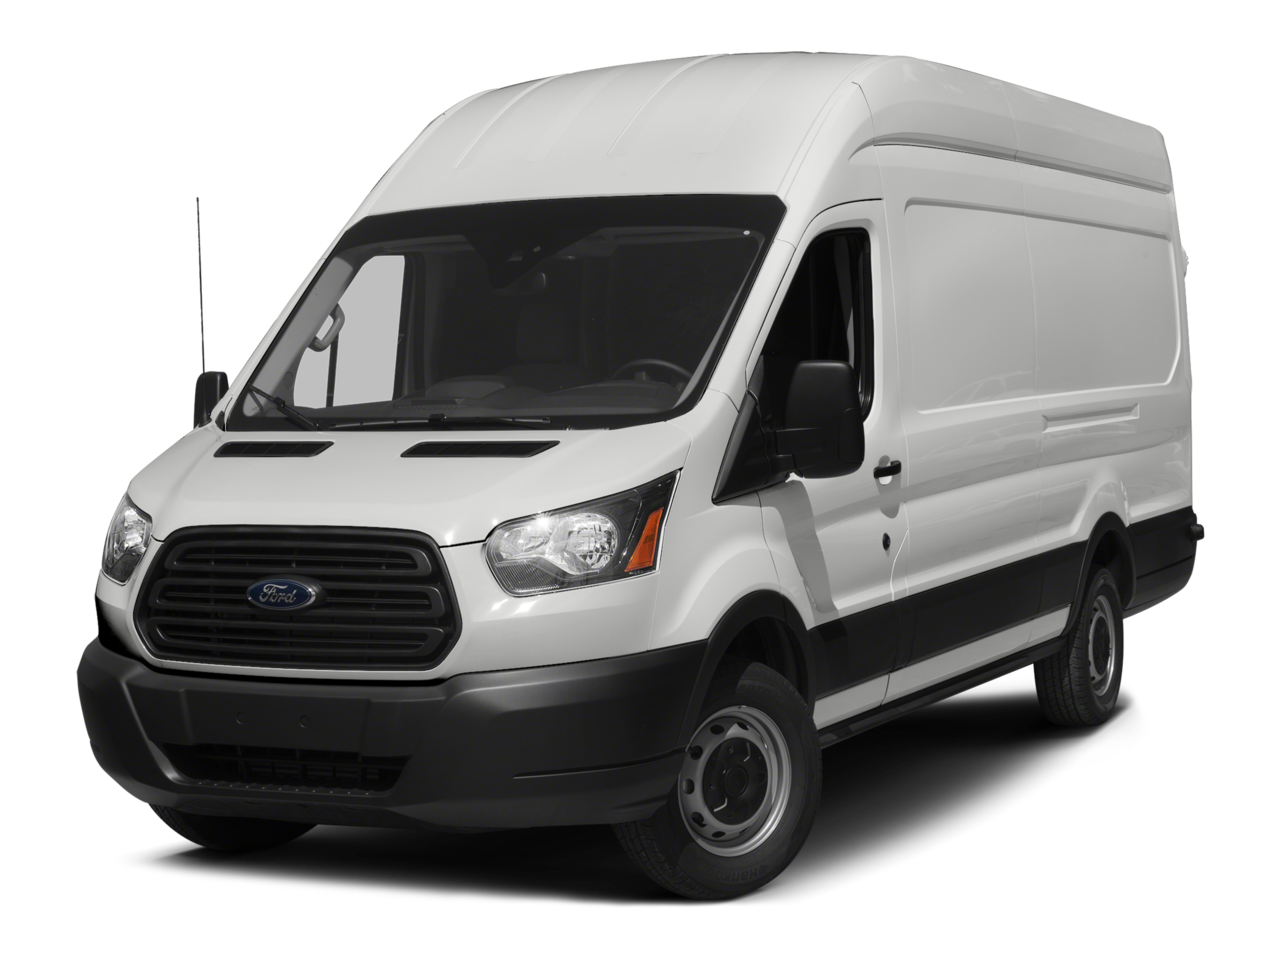 2015 Ford Transit-350 HD Repair: Service and Maintenance Cost